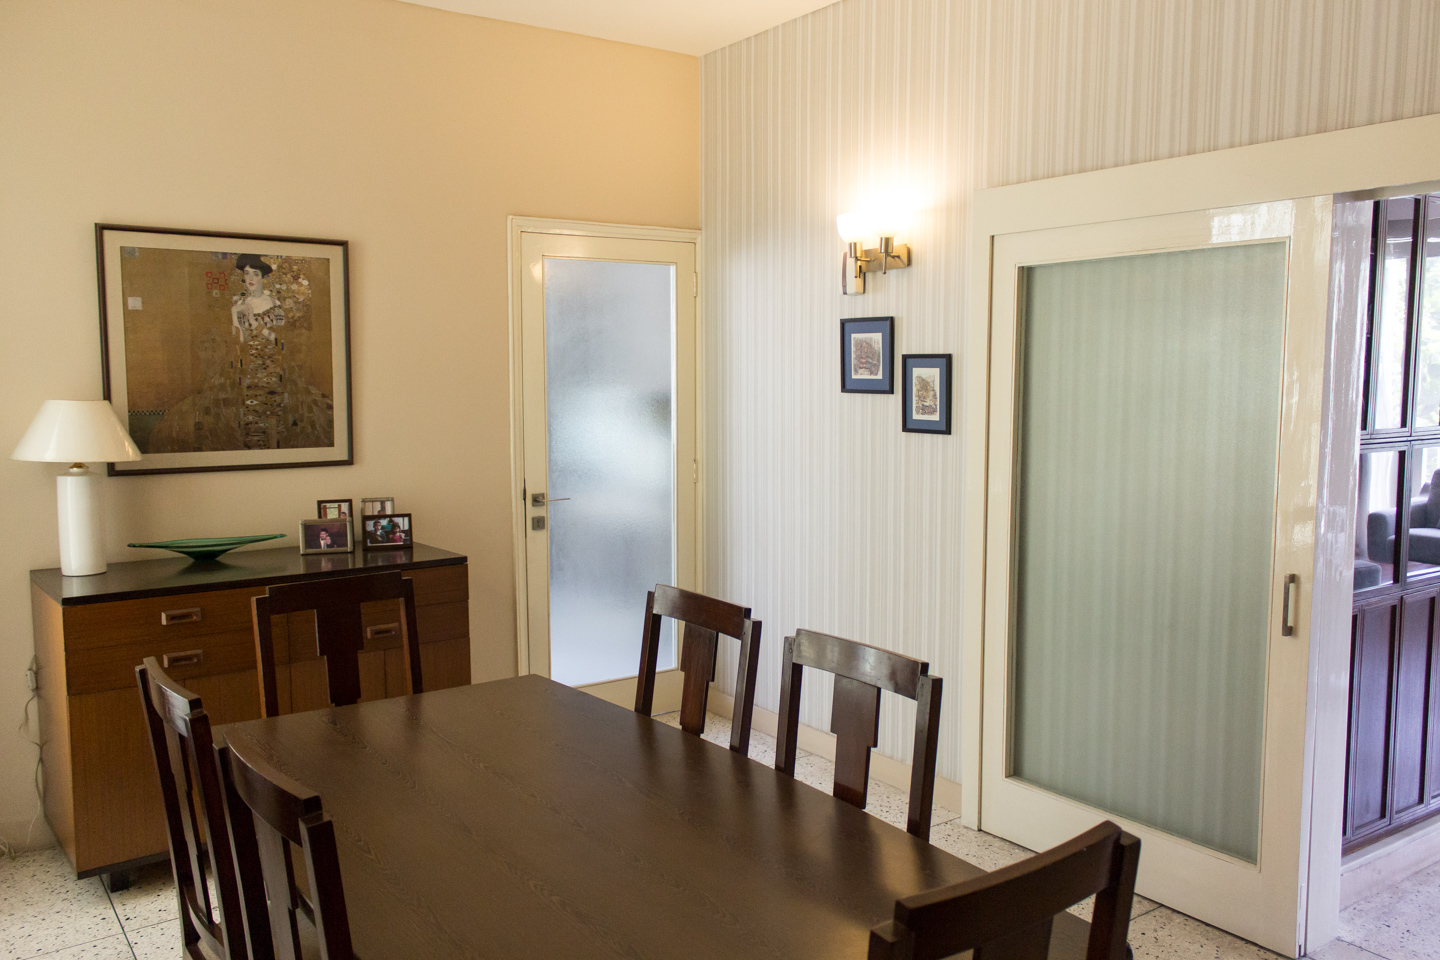 The dining room with frosted glass doors leading to the kitchen and drawing room.